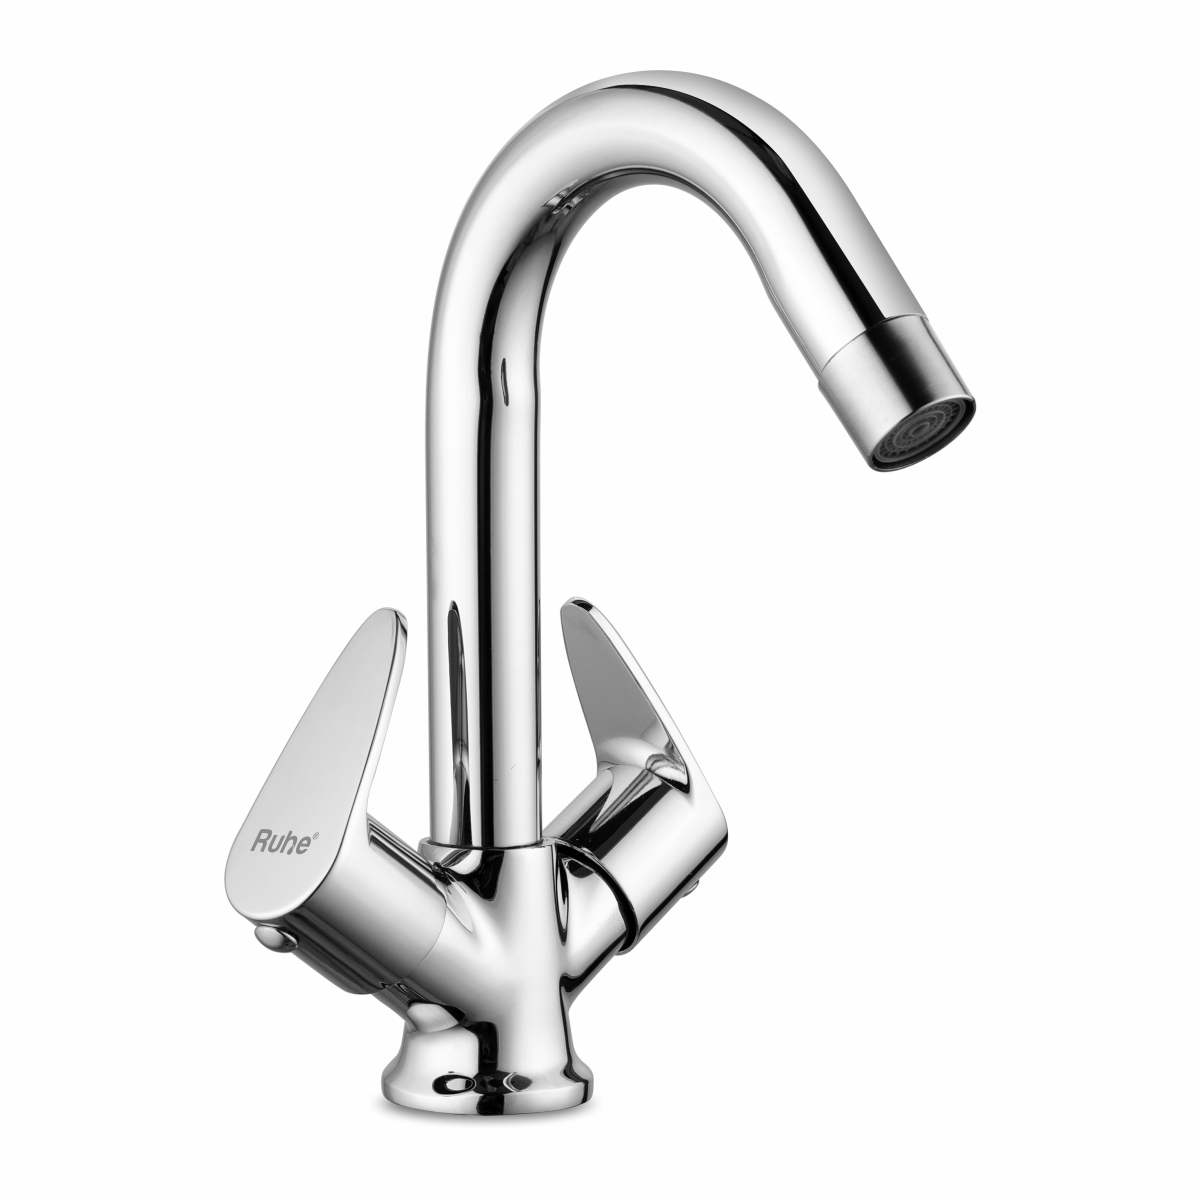 Liva Centre Hole Basin Mixer with Small (12 inches) Round Swivel Spout Faucet